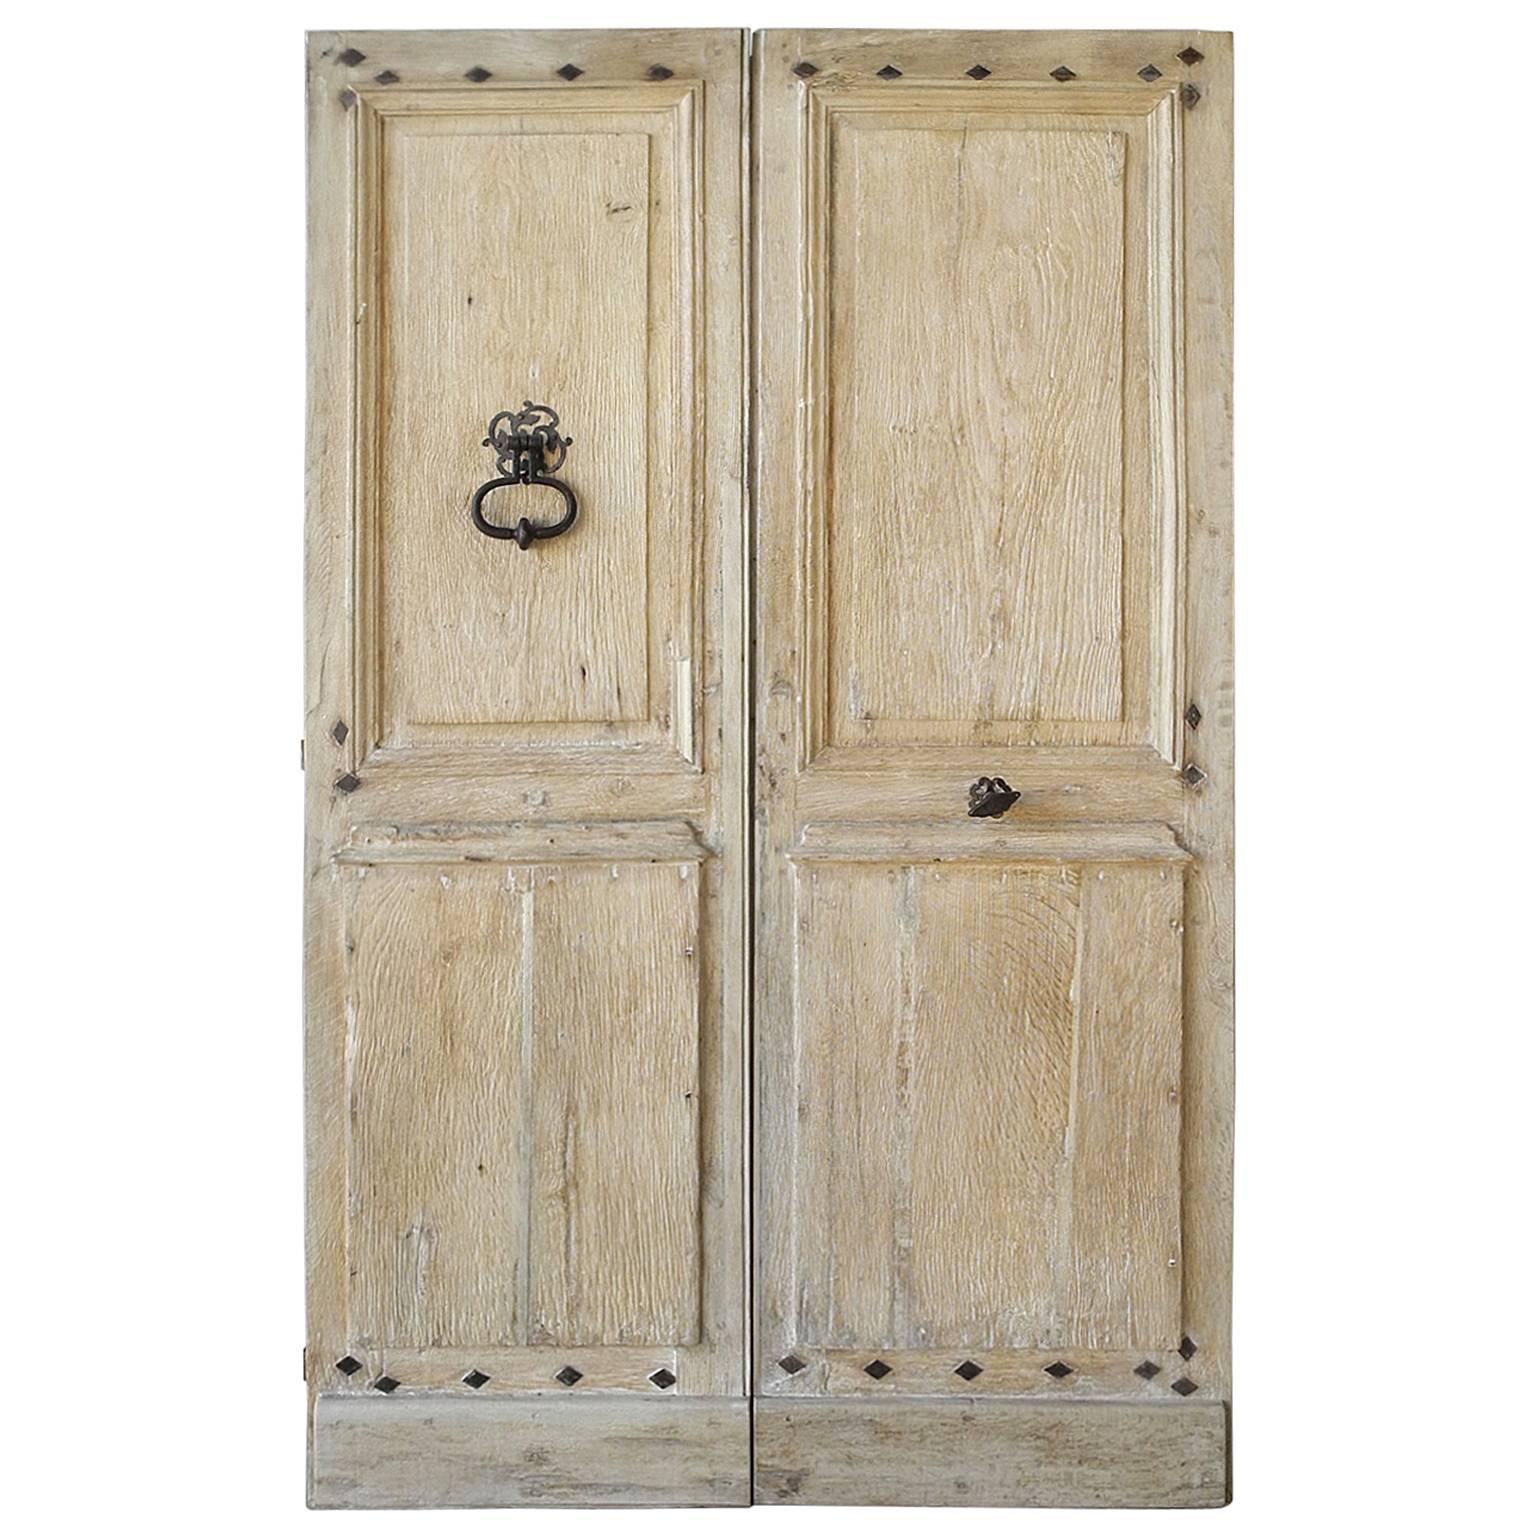 Pair of Antique 18th Century Entrance Doors from St. Marcellin